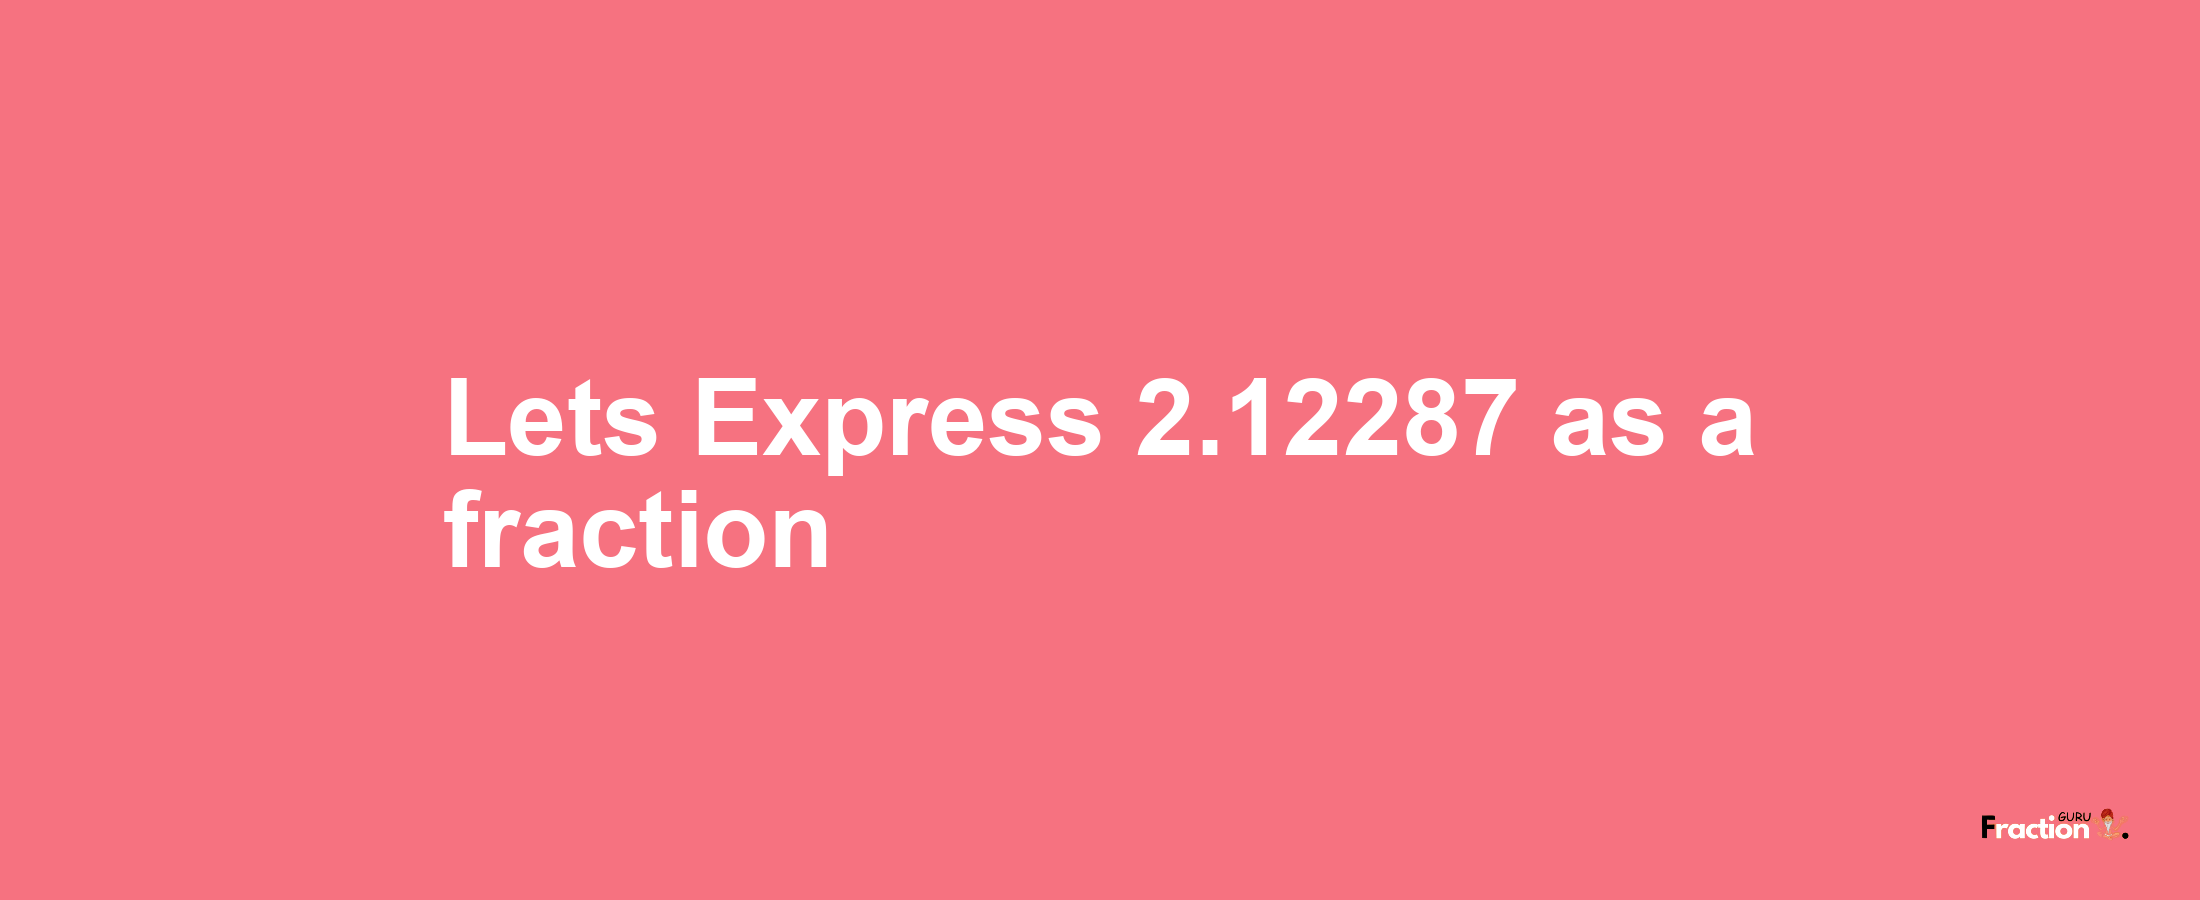 Lets Express 2.12287 as afraction